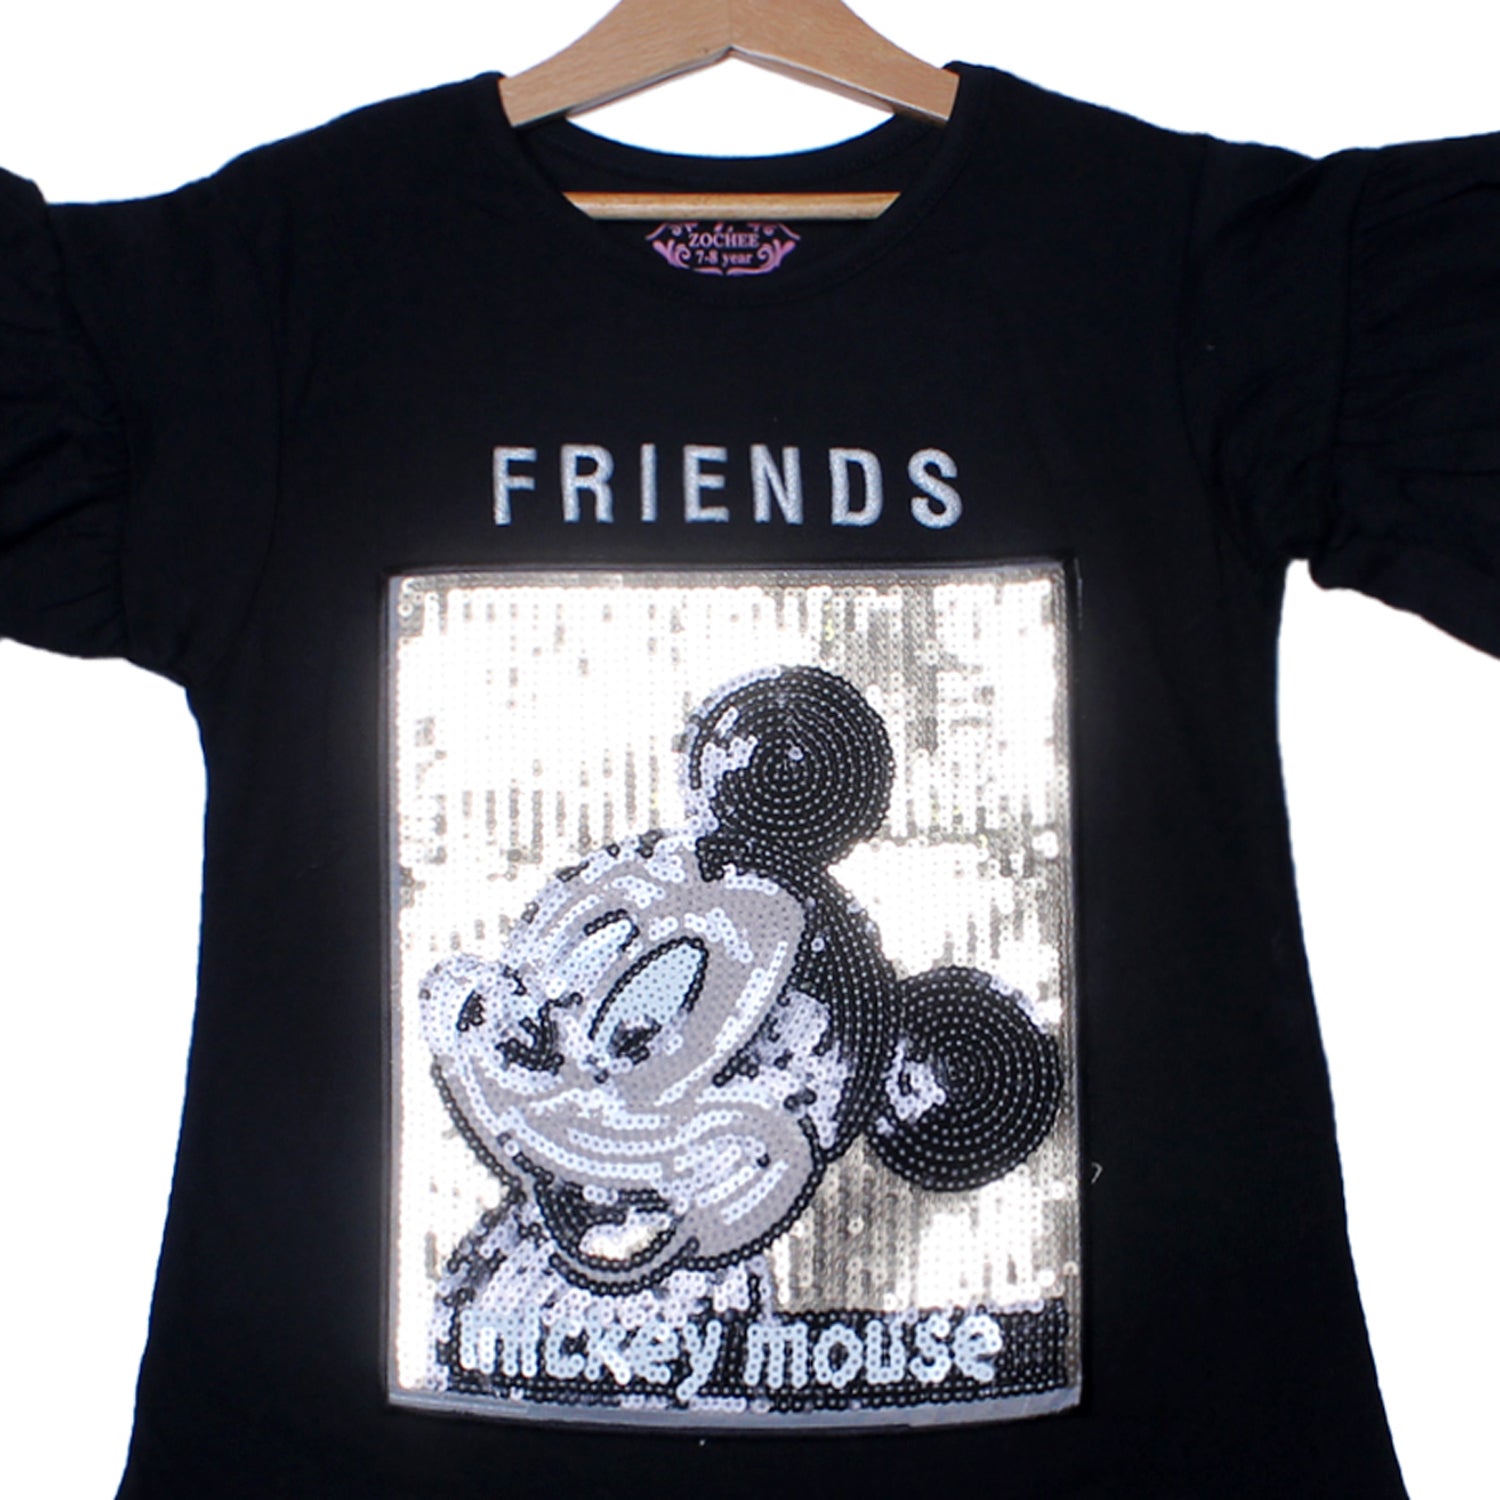 NEW BLACK FRIENDS MICKEY MOUSE PATCH T-SHIRT TOP FOR GIRLS